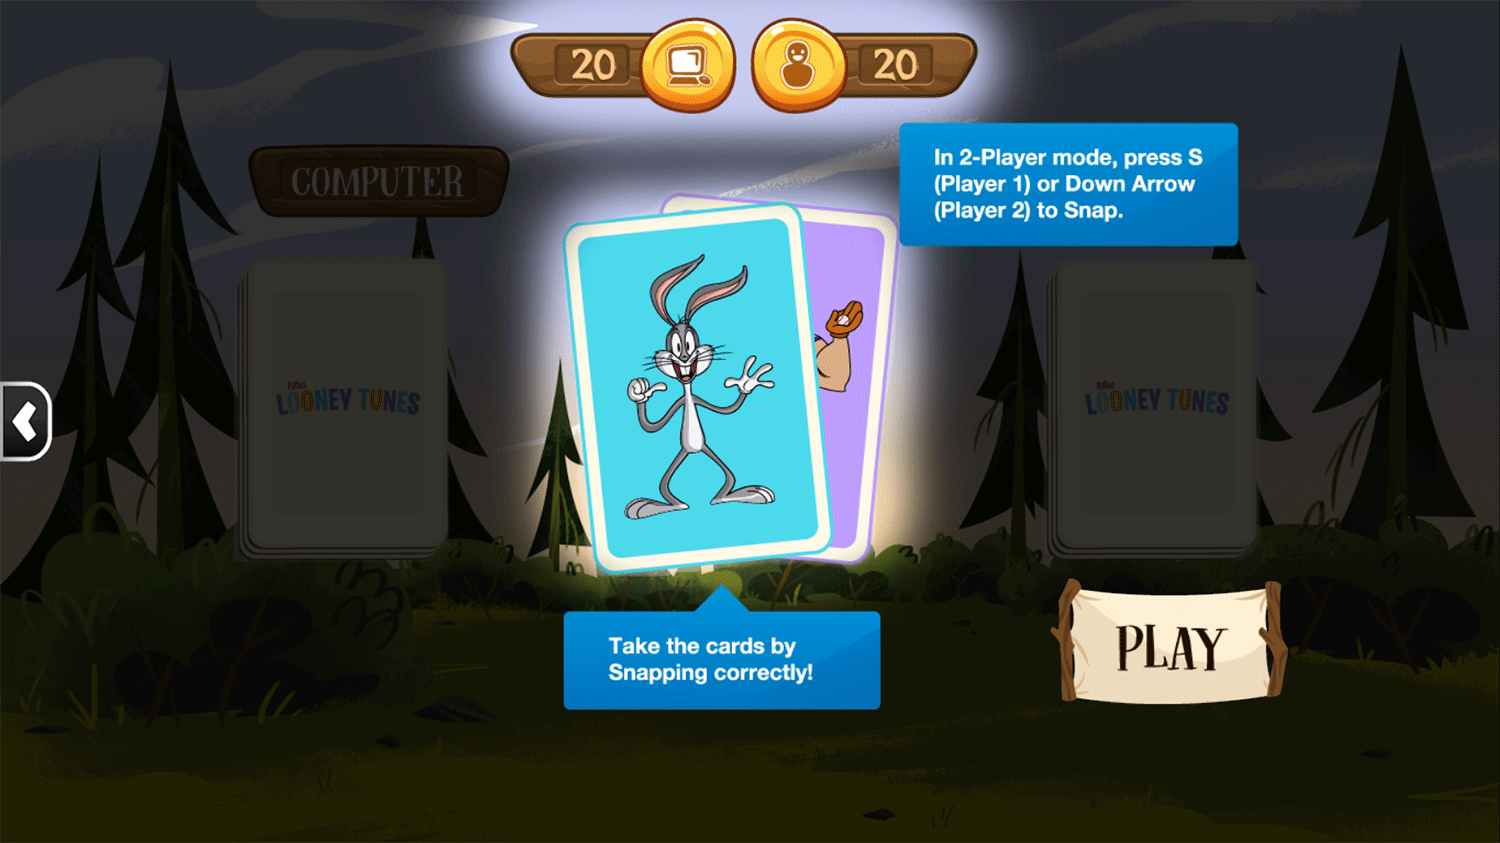 New Looney Tunes Snap Game Instructions Screenshot.